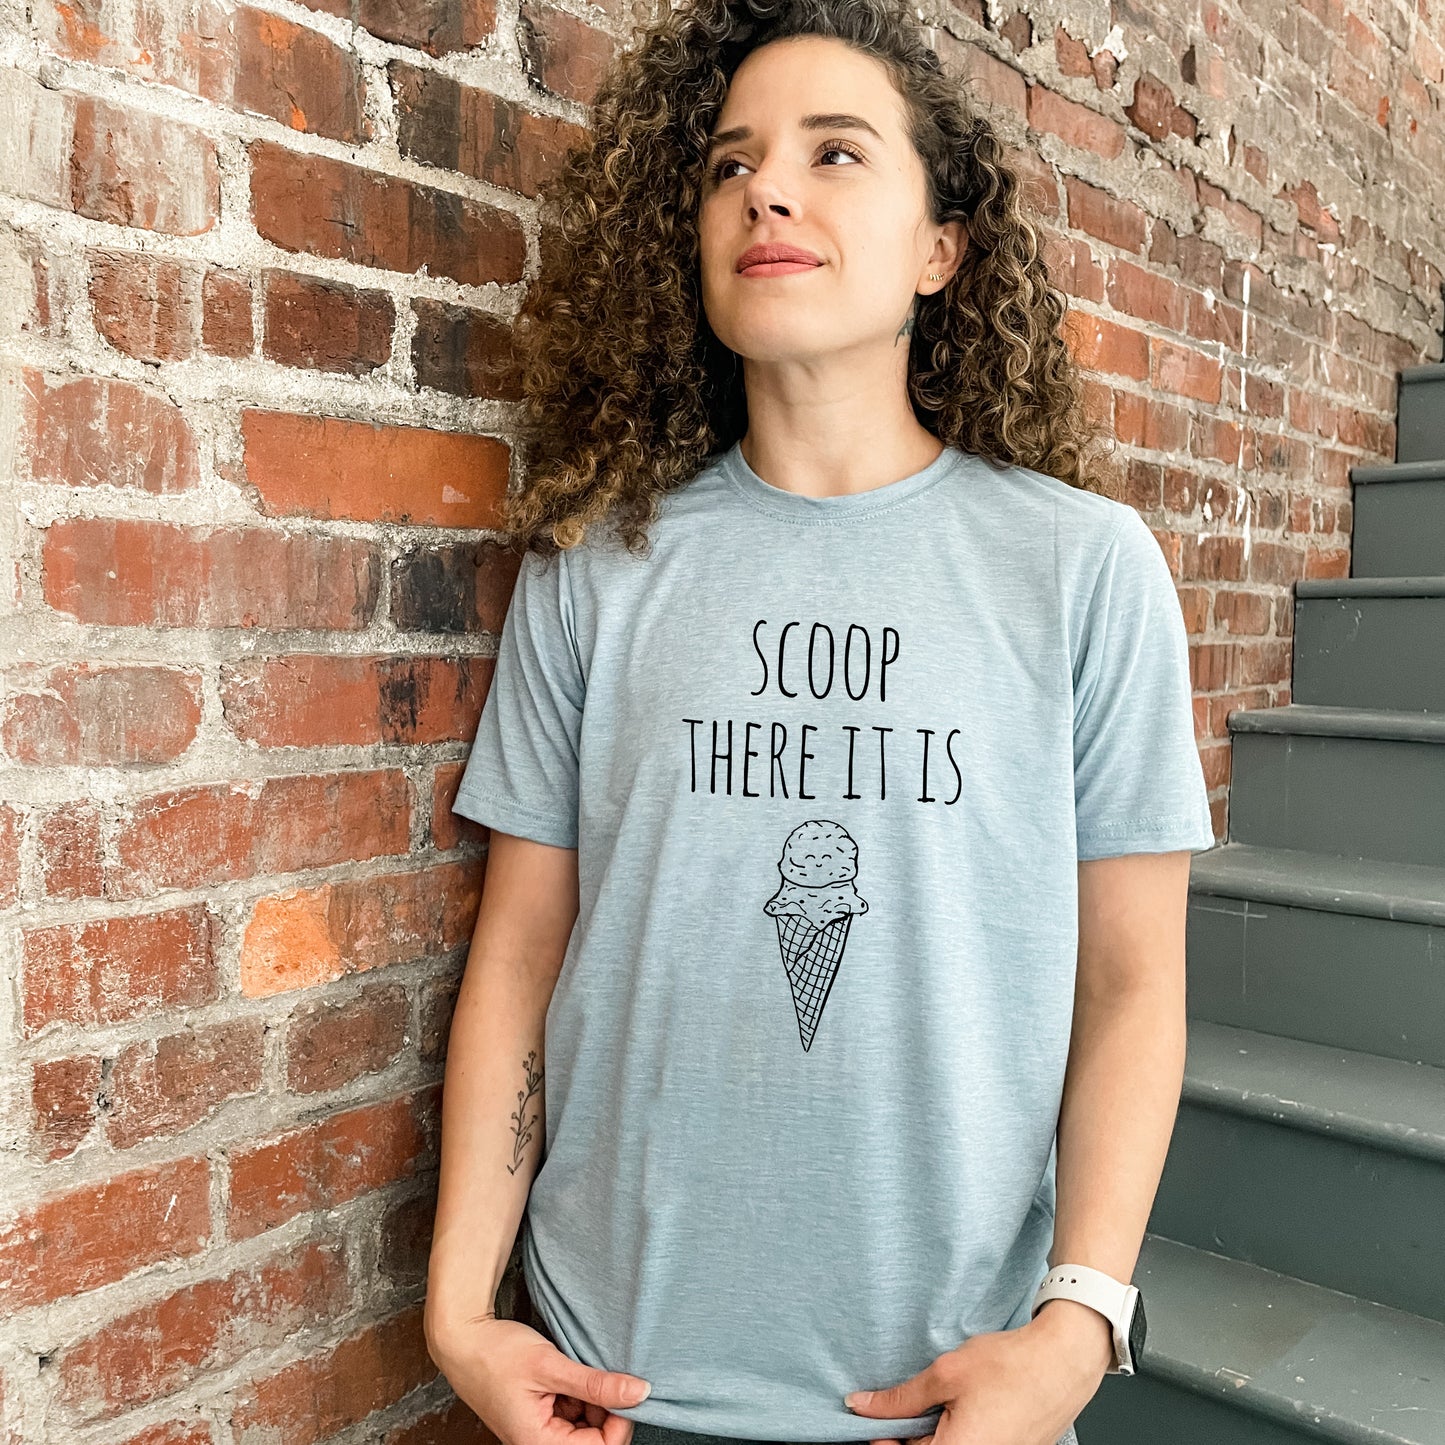 Scoop, There It Is - Men's / Unisex Tee - Stonewash Blue or Sage